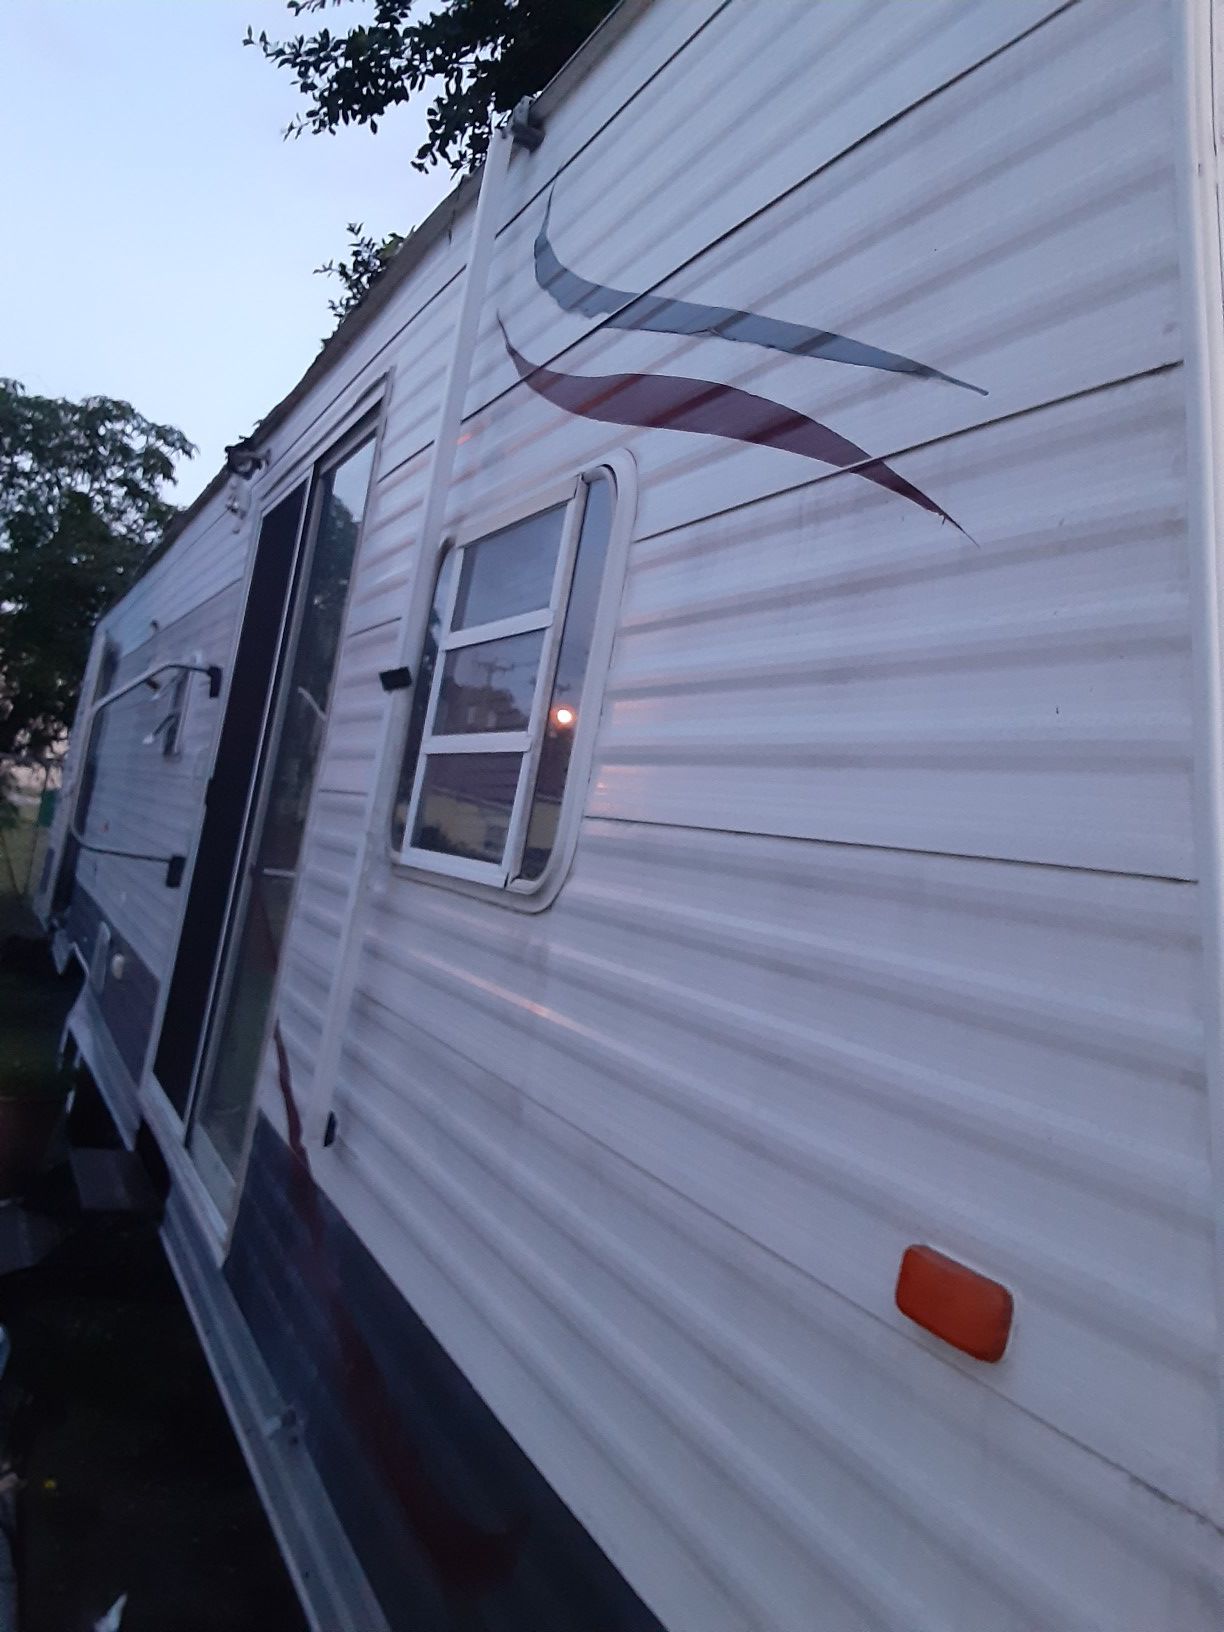 39 footer 2008 RV trailer must sell ASAP great deal good condition